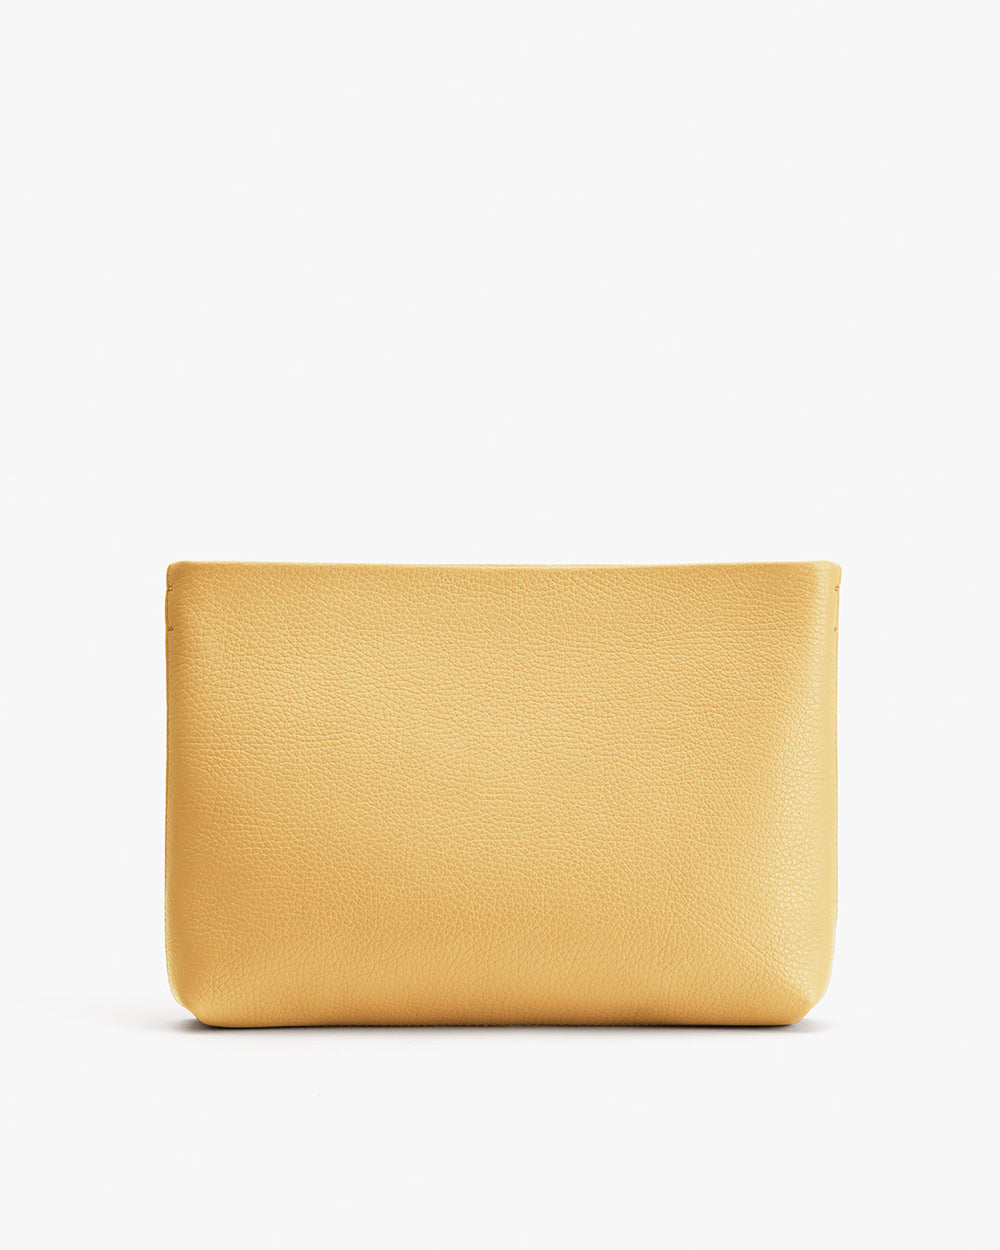 Leather pouch against a plain background.